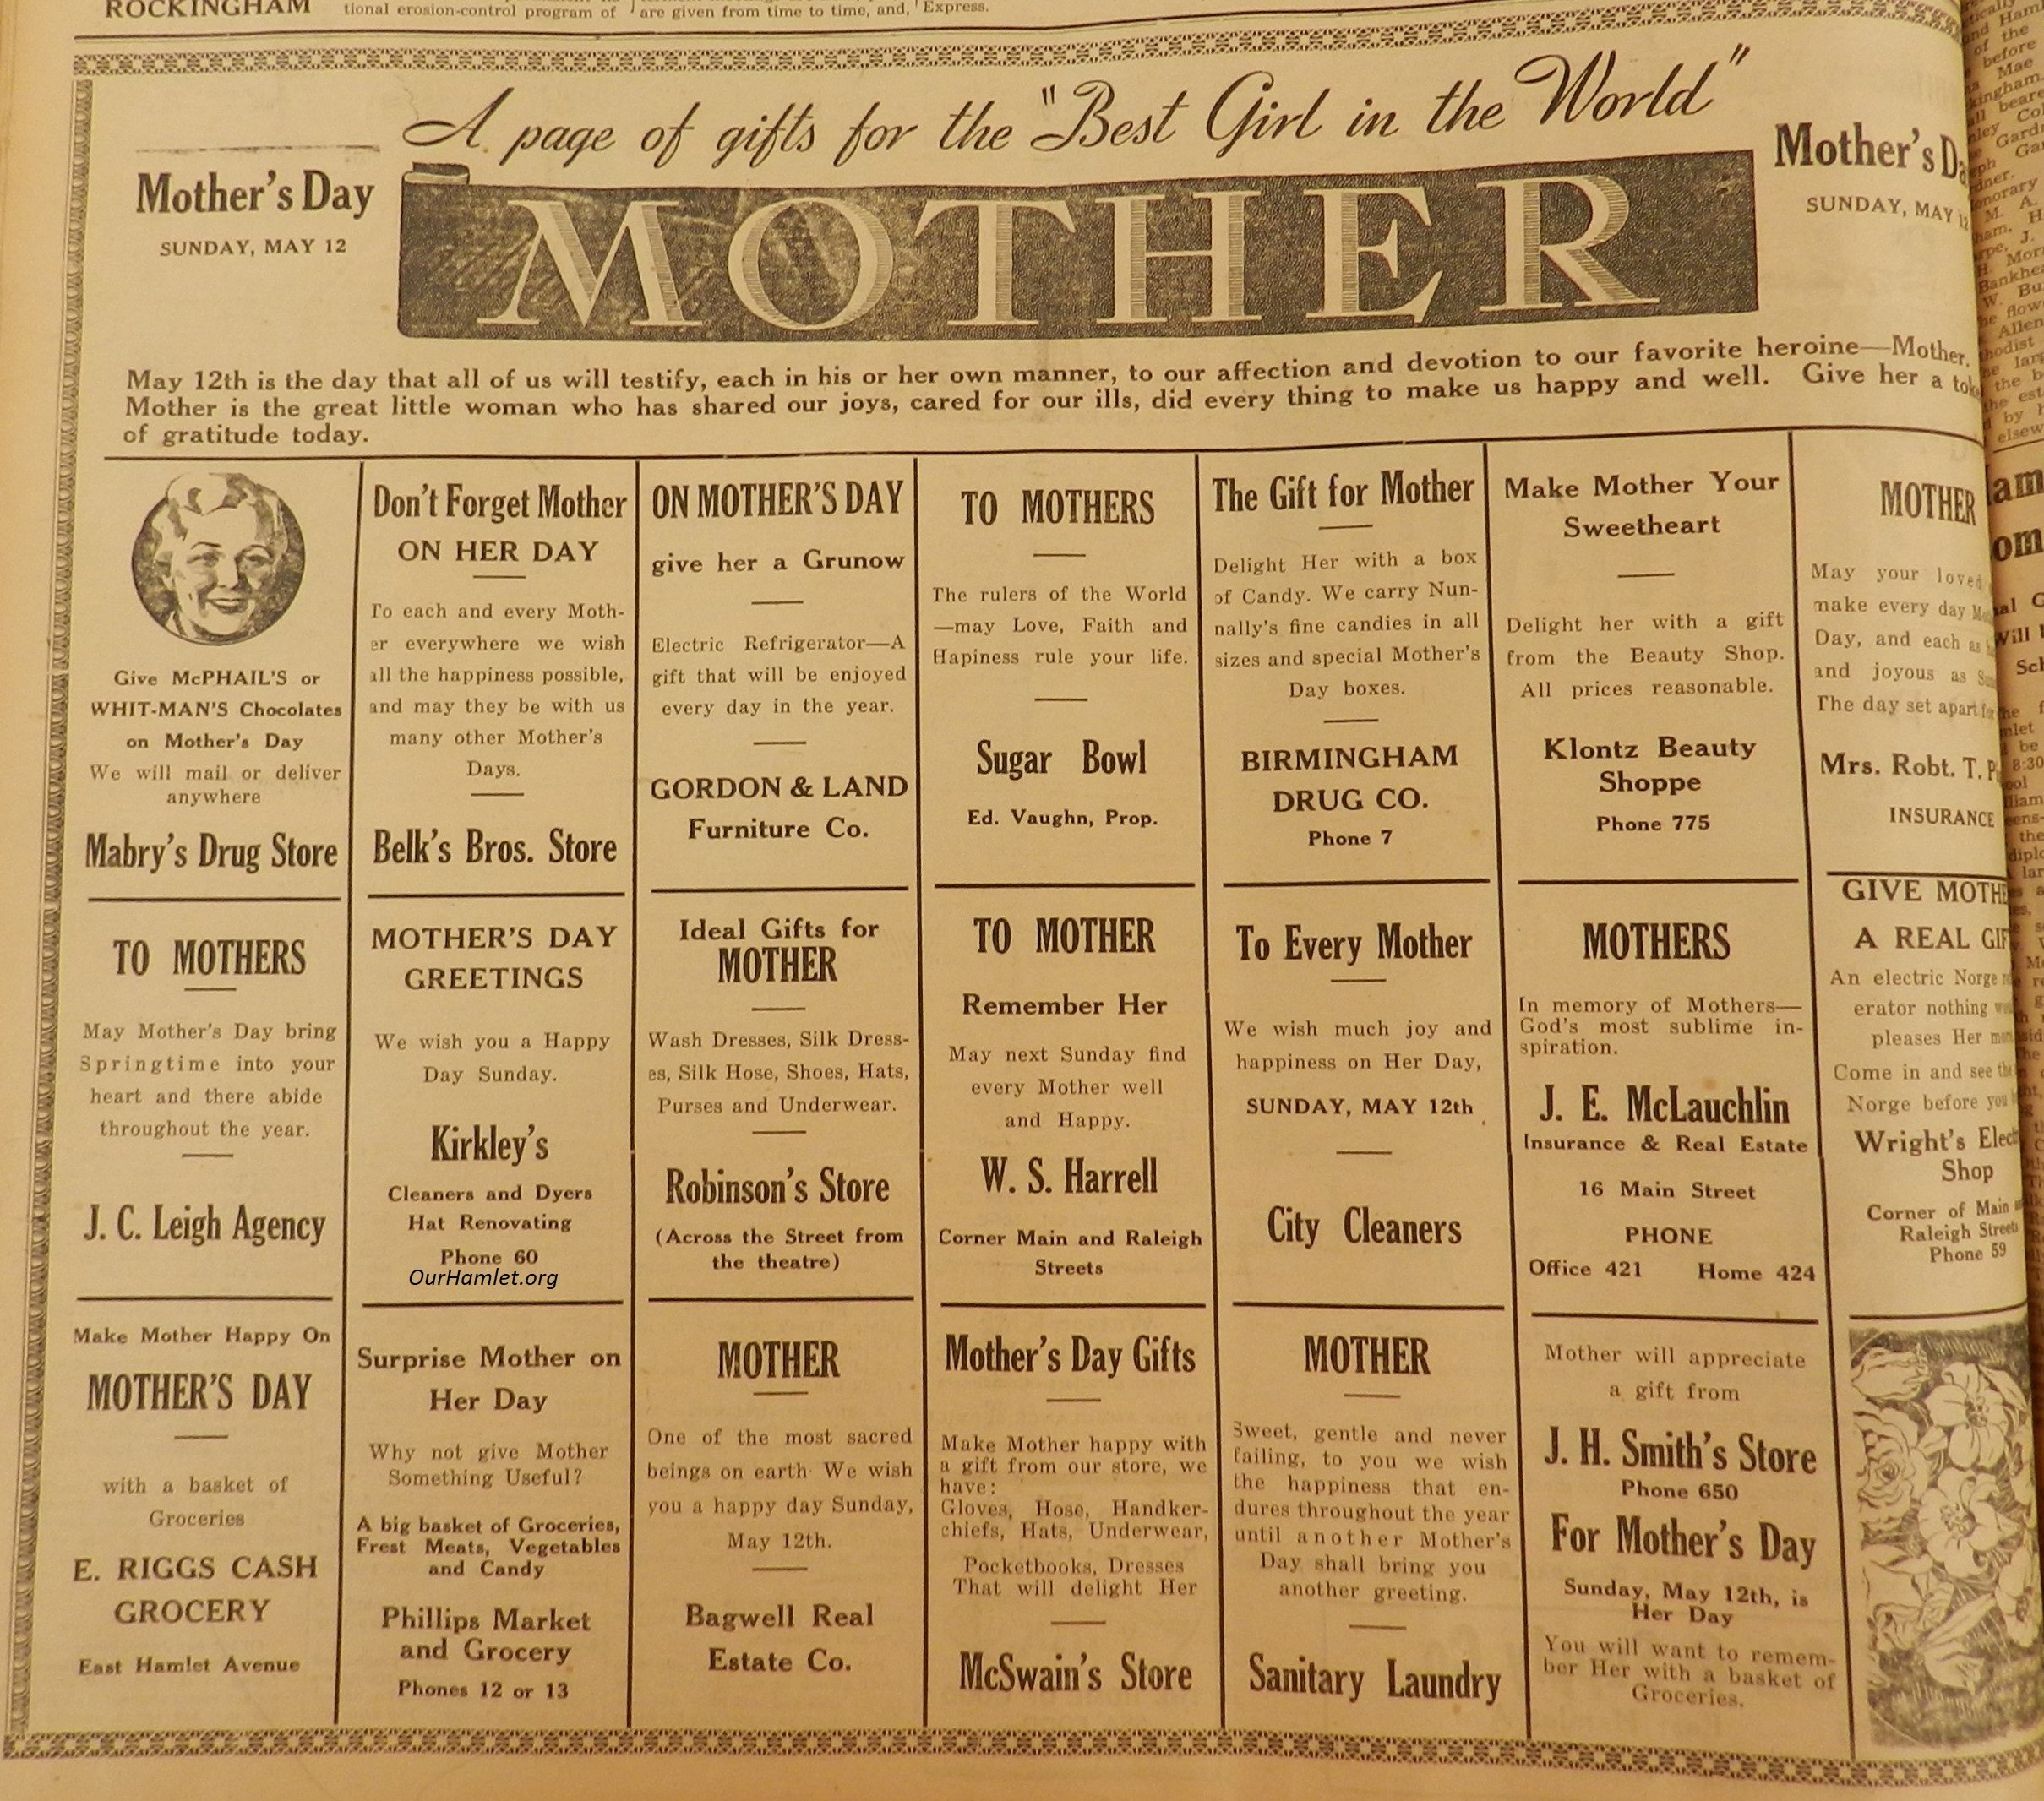 1935 Mother's Day stores OH.jpg